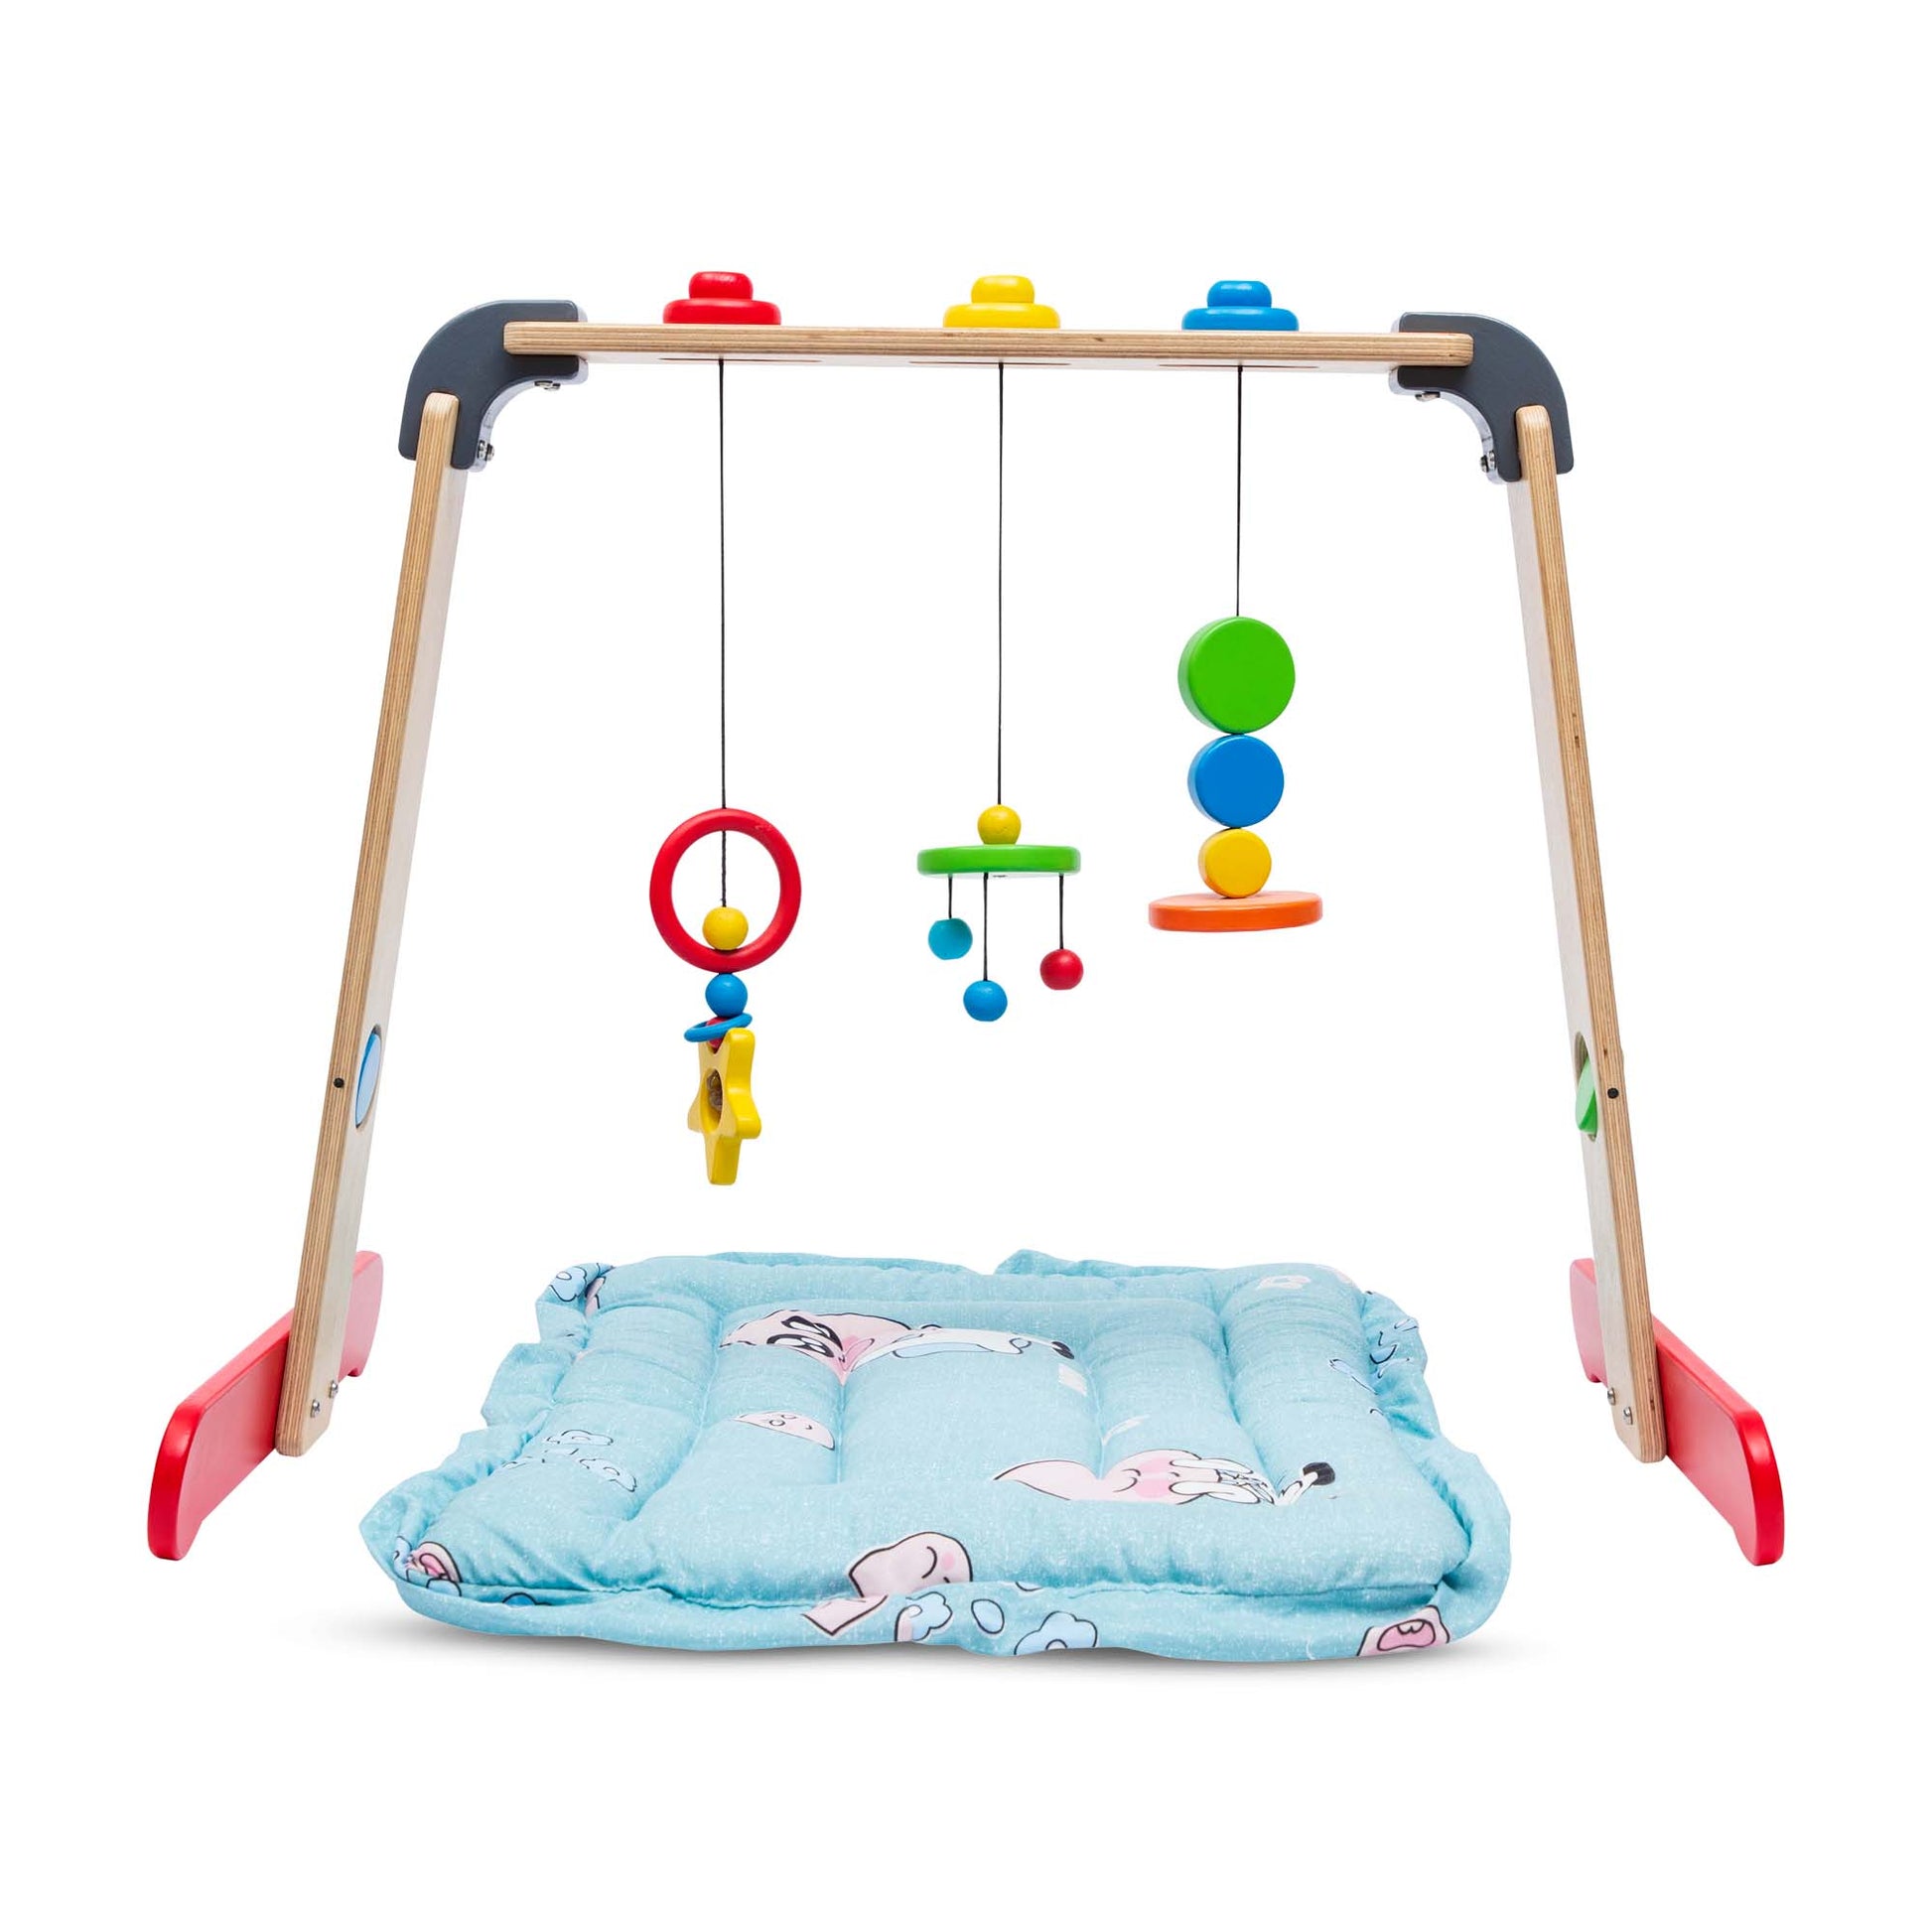 Buy Wooden Play Gym with Matt - SkilloToys